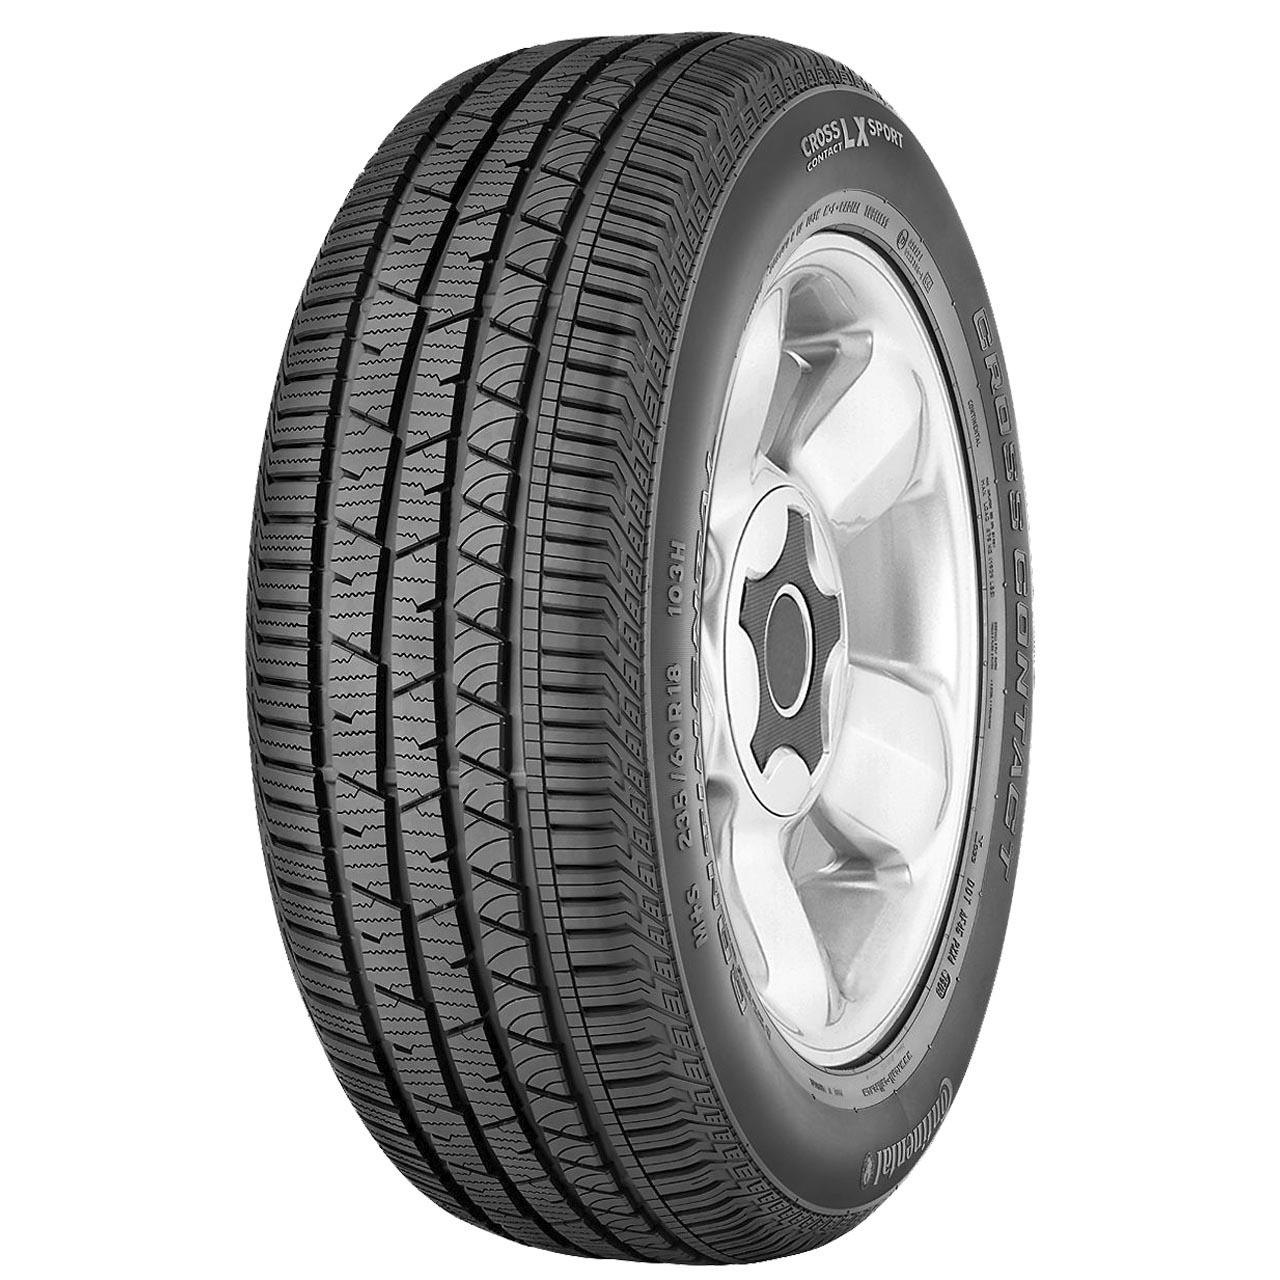 Continental CROSSCONTACT LX SPORT 245/45R20 99V FR FOR